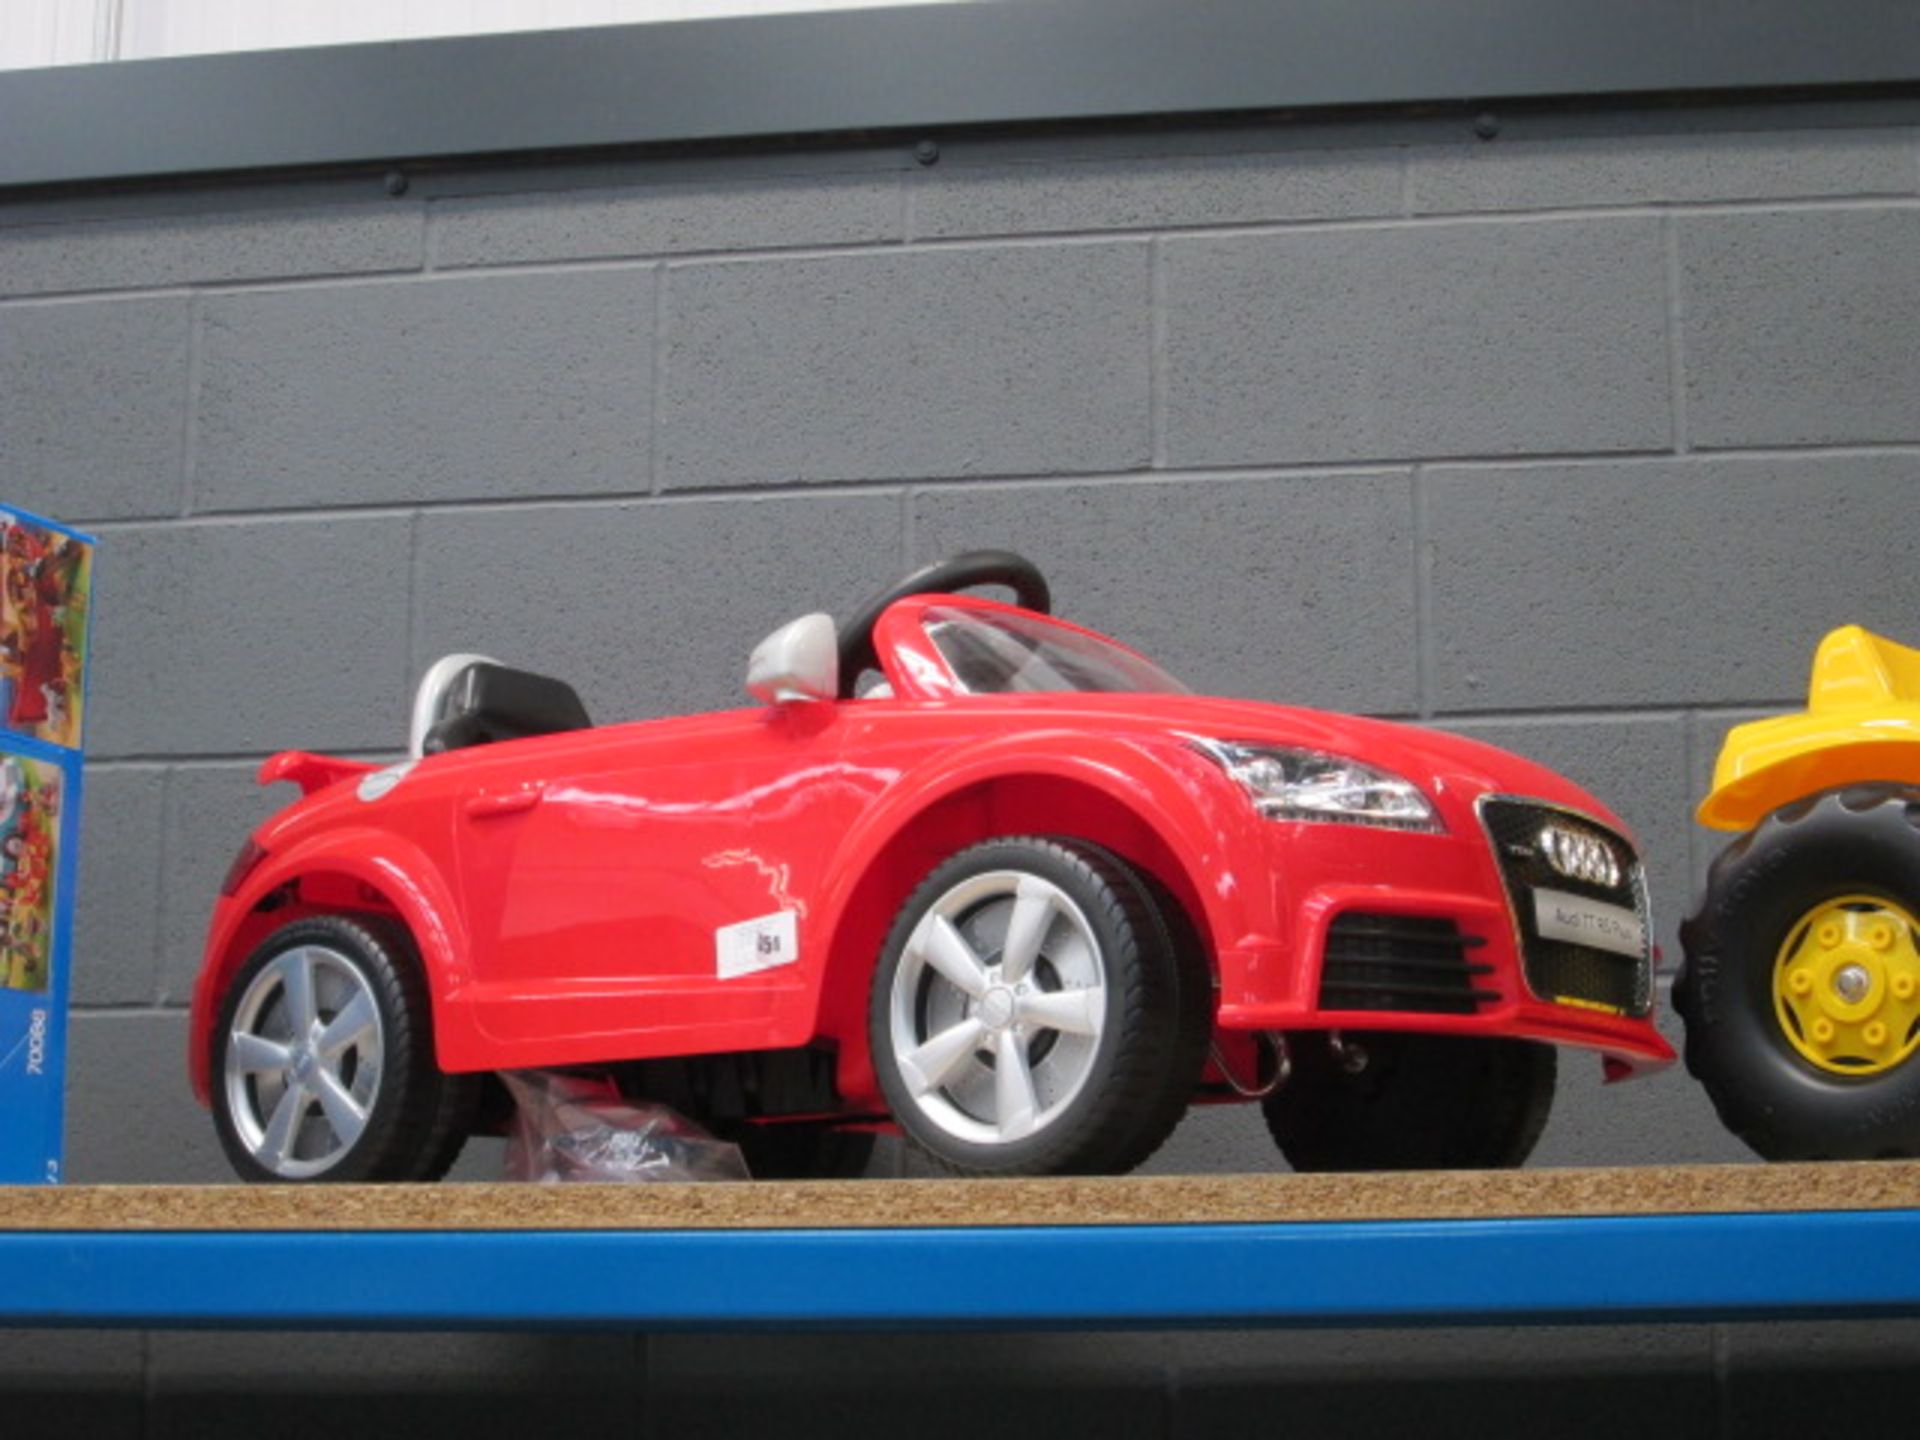 Electric red Audi TT car with charger